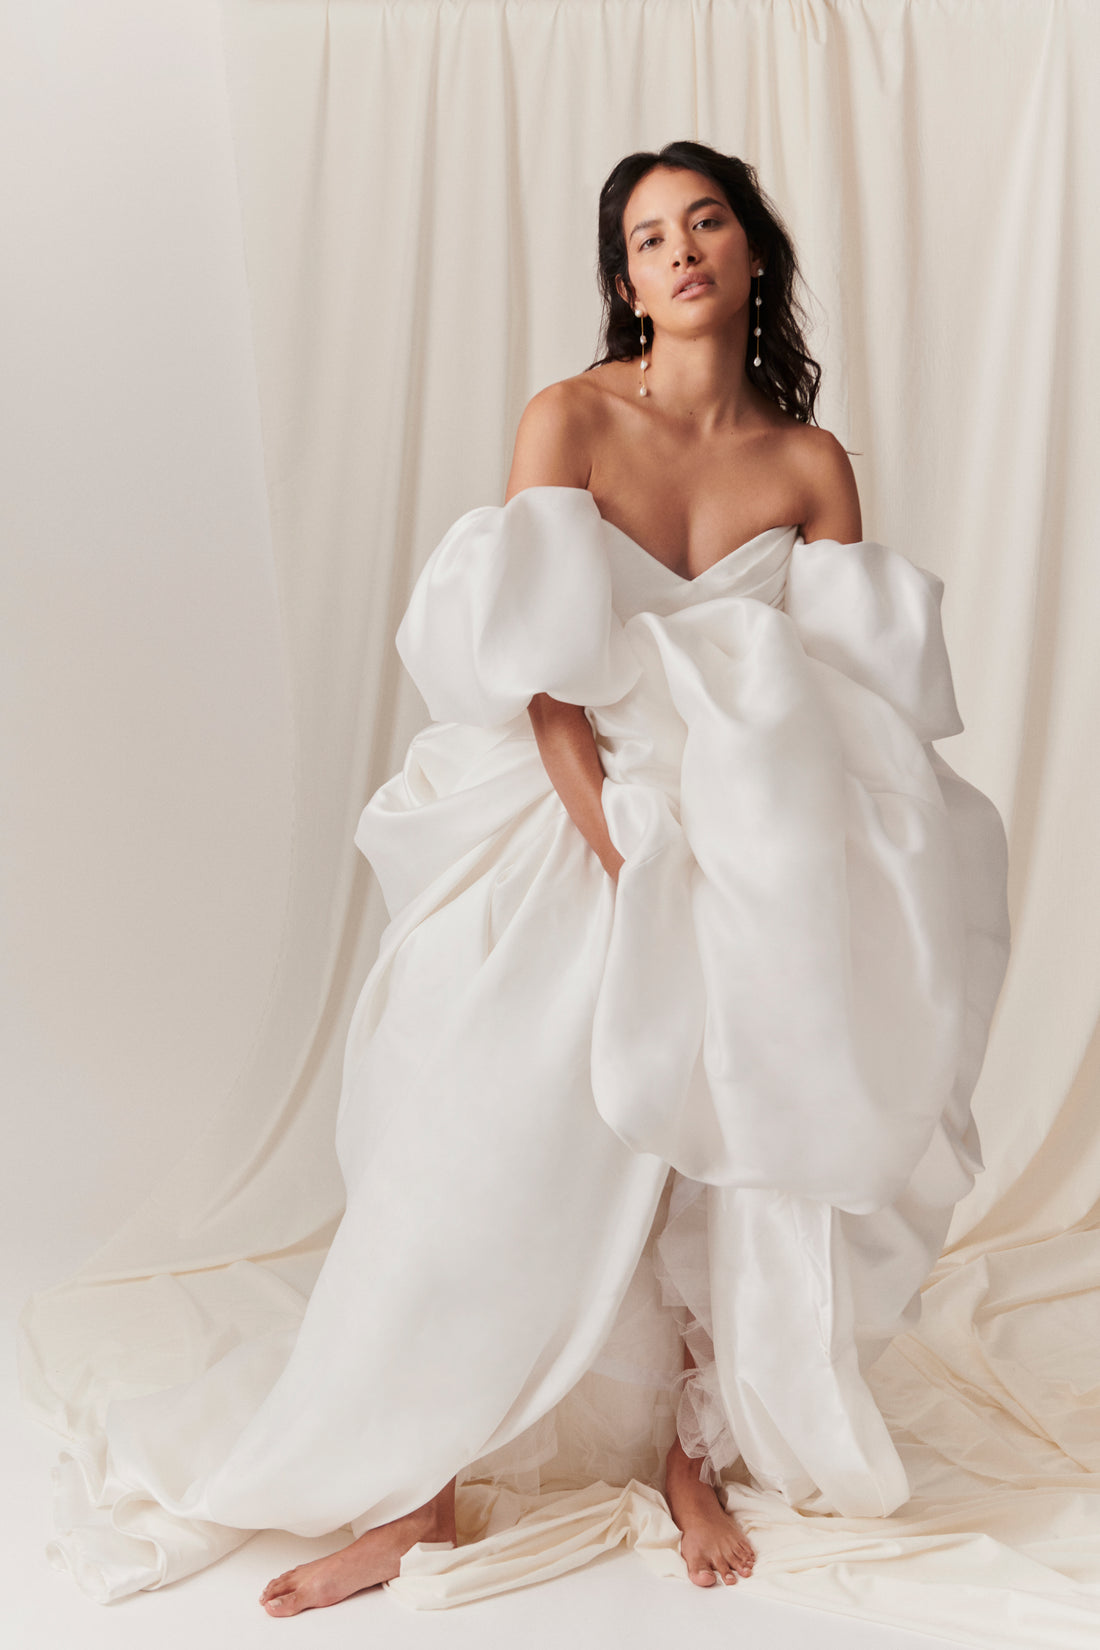 Bridal Hire - Top Wedding Dresses and Accessories